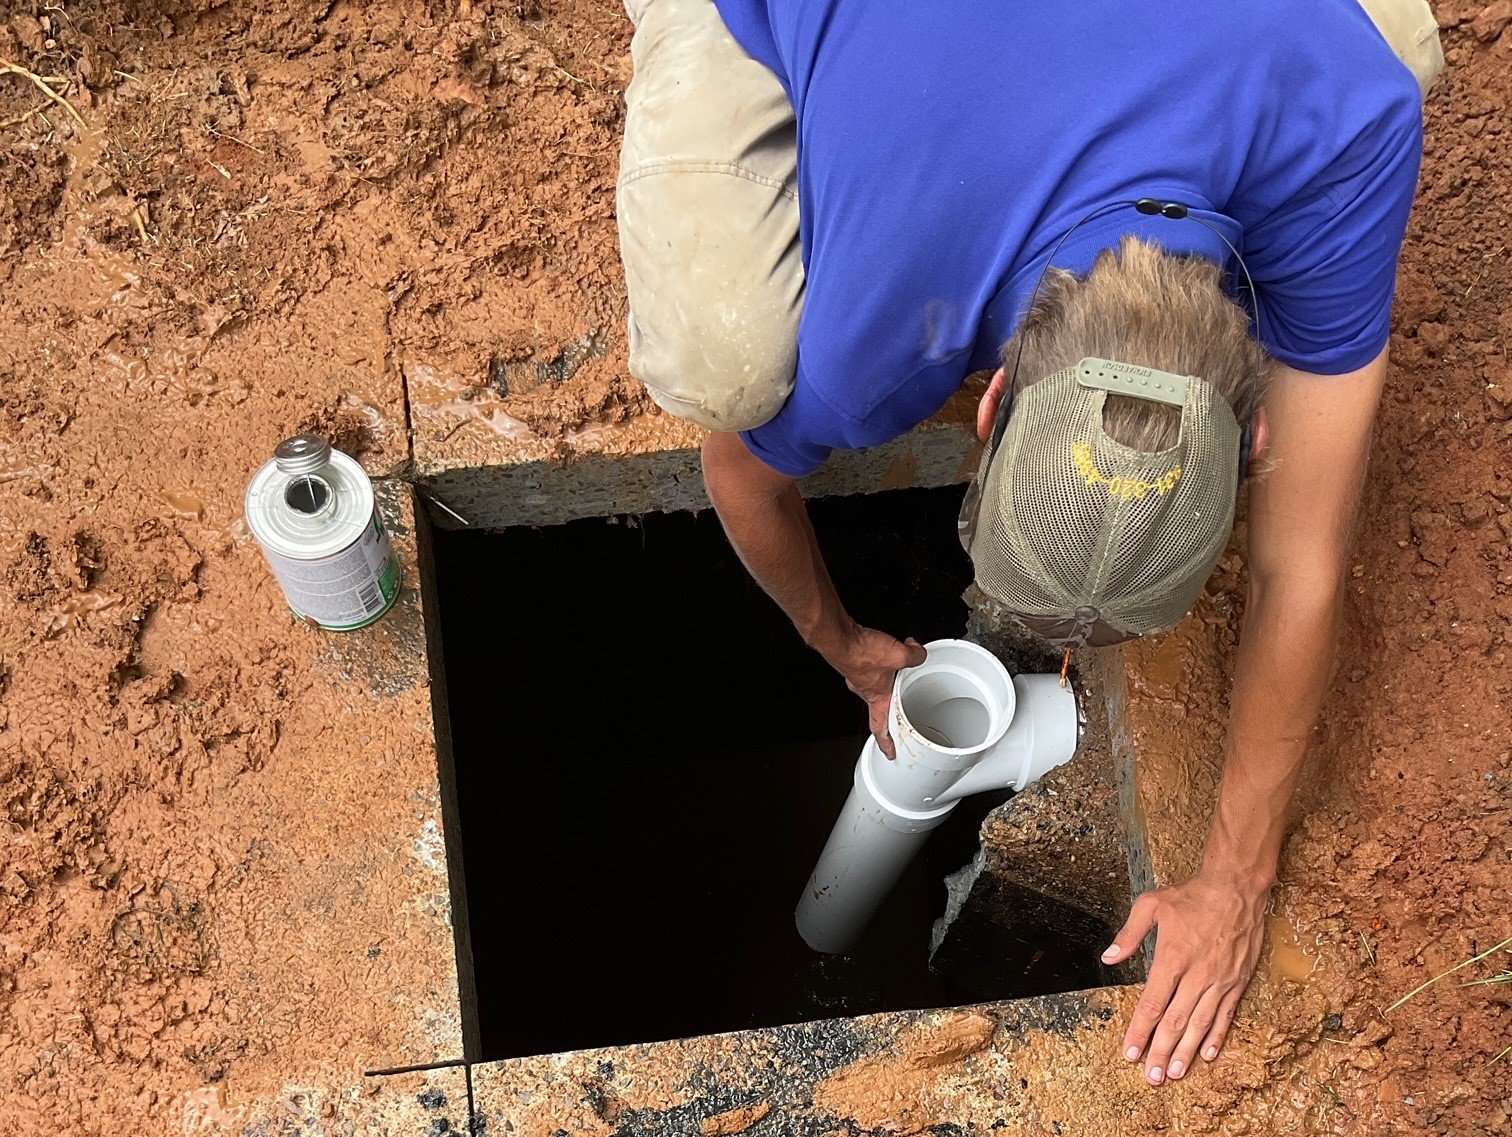 Man fixing septic system.